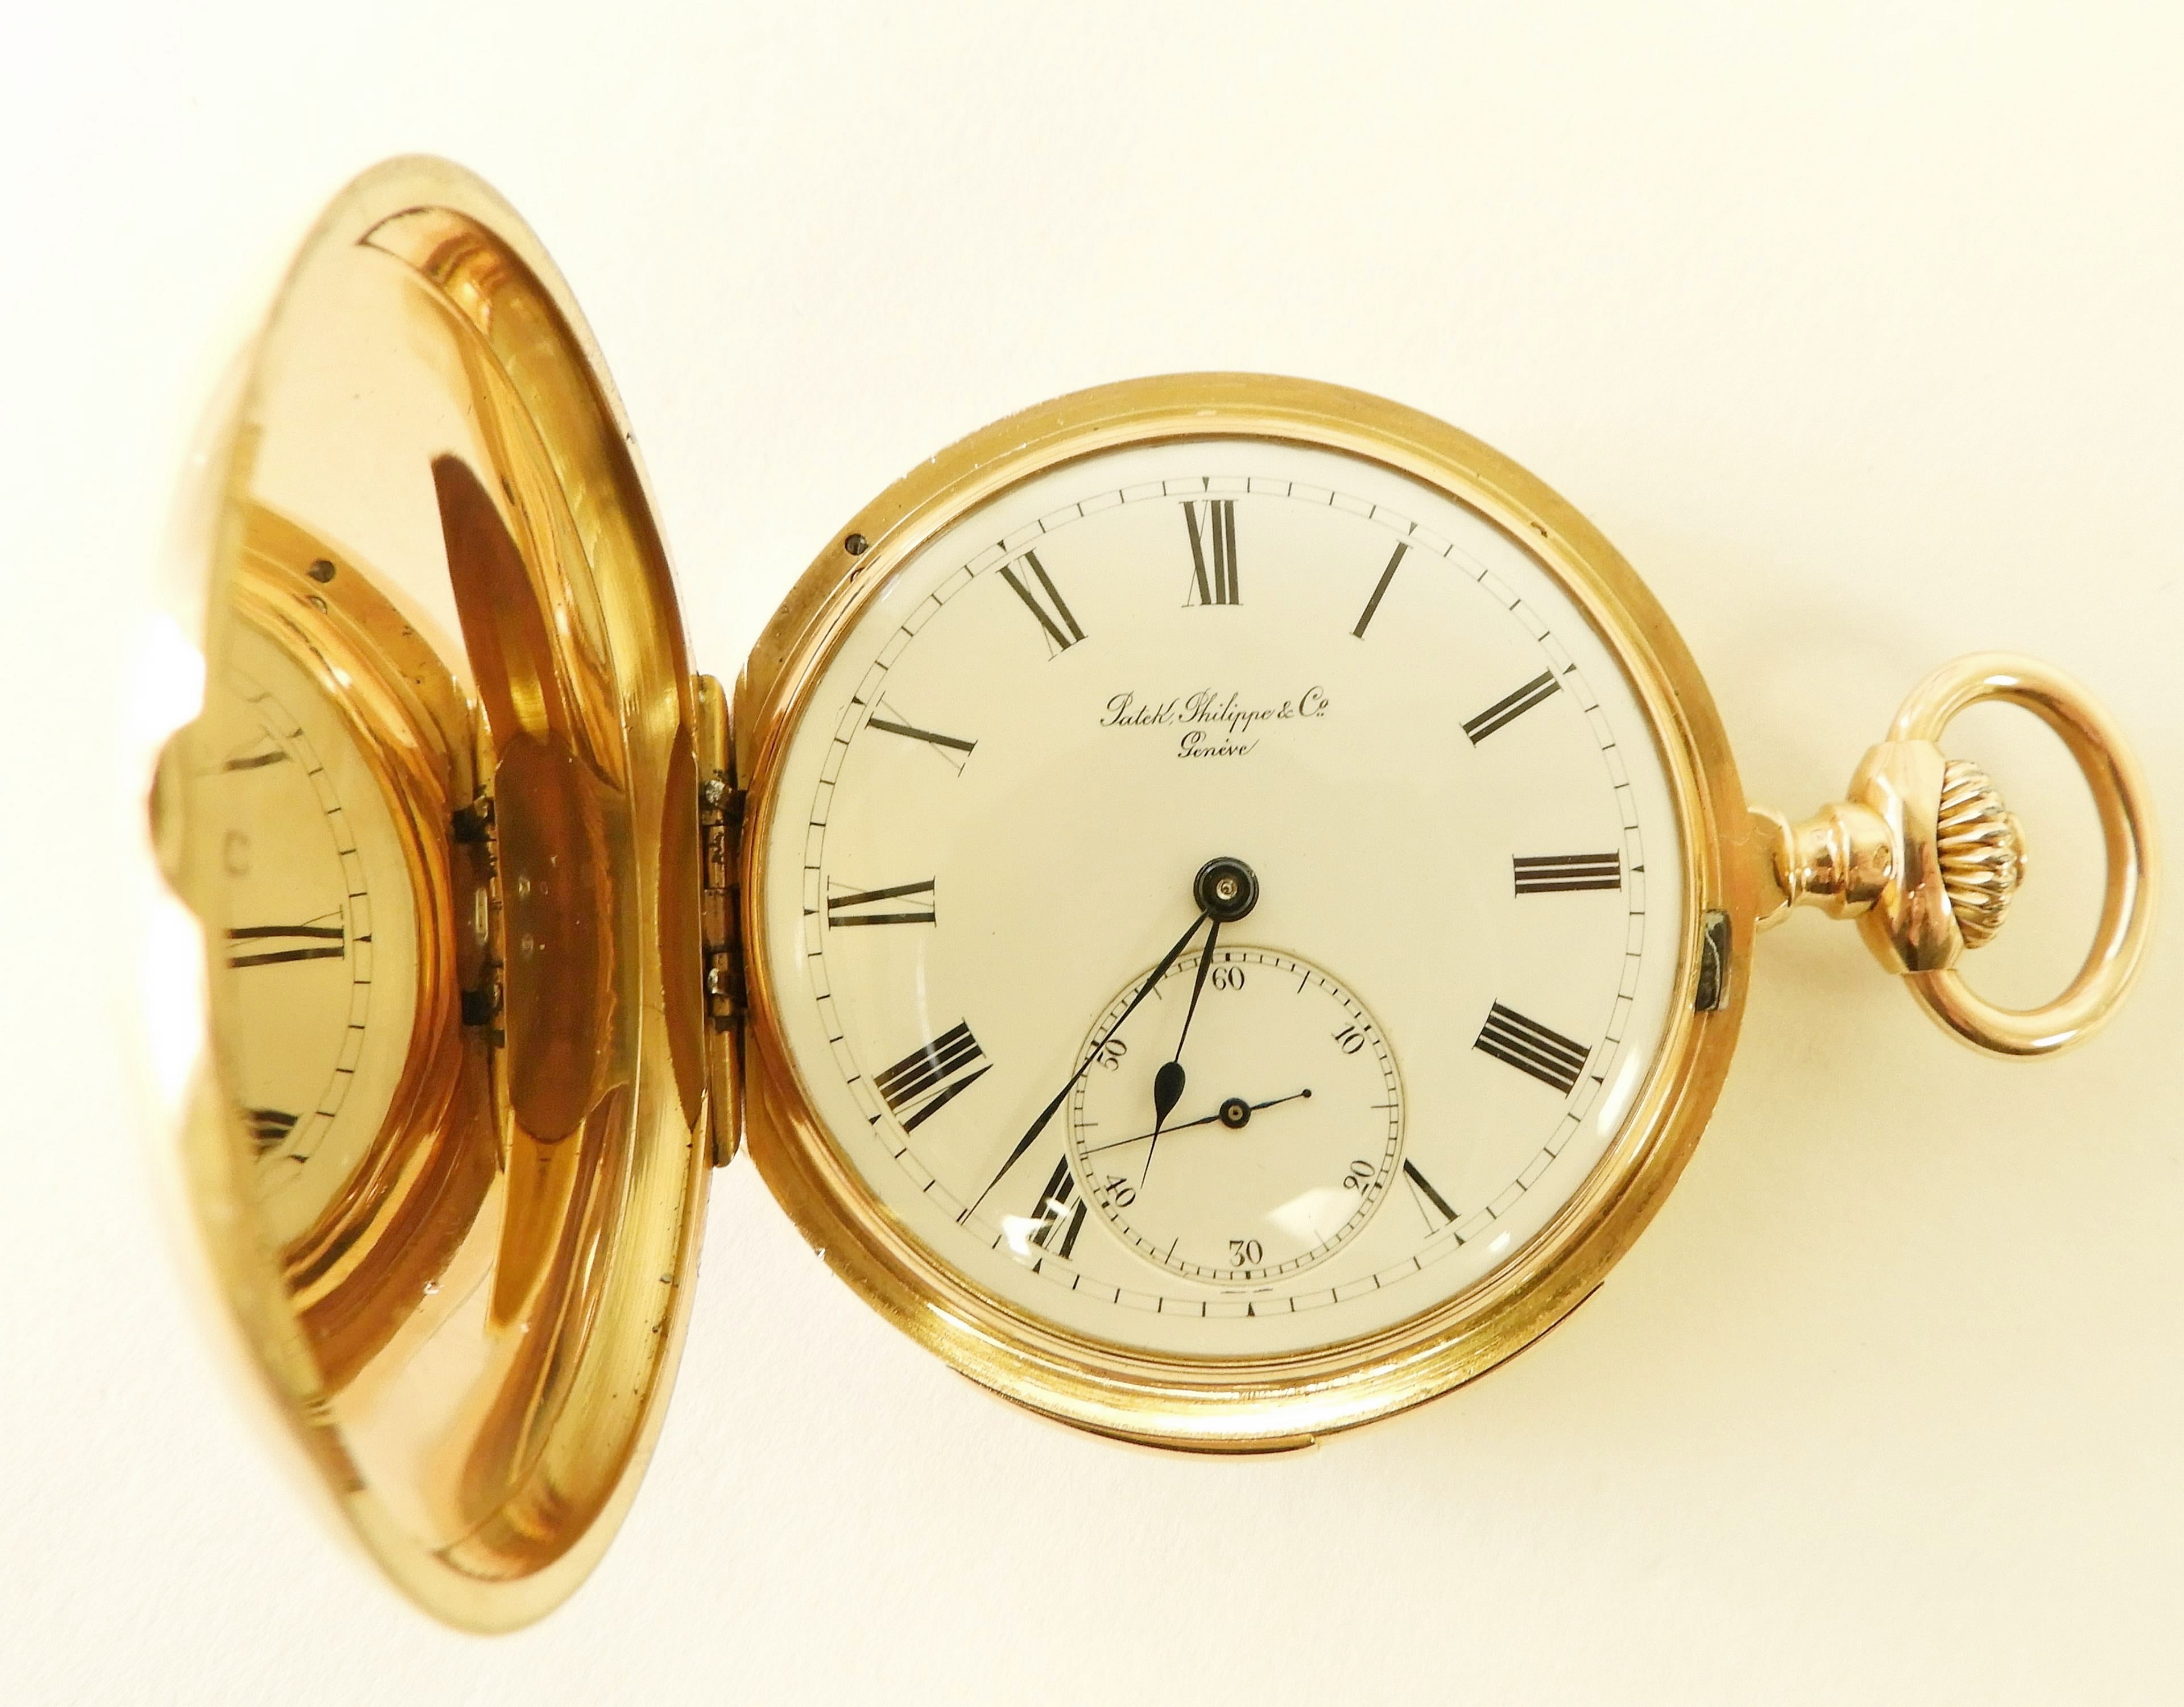 Patek, Philippe & Co. 18K Gold Pocket Watch, C. 1883. Sold For $11,050